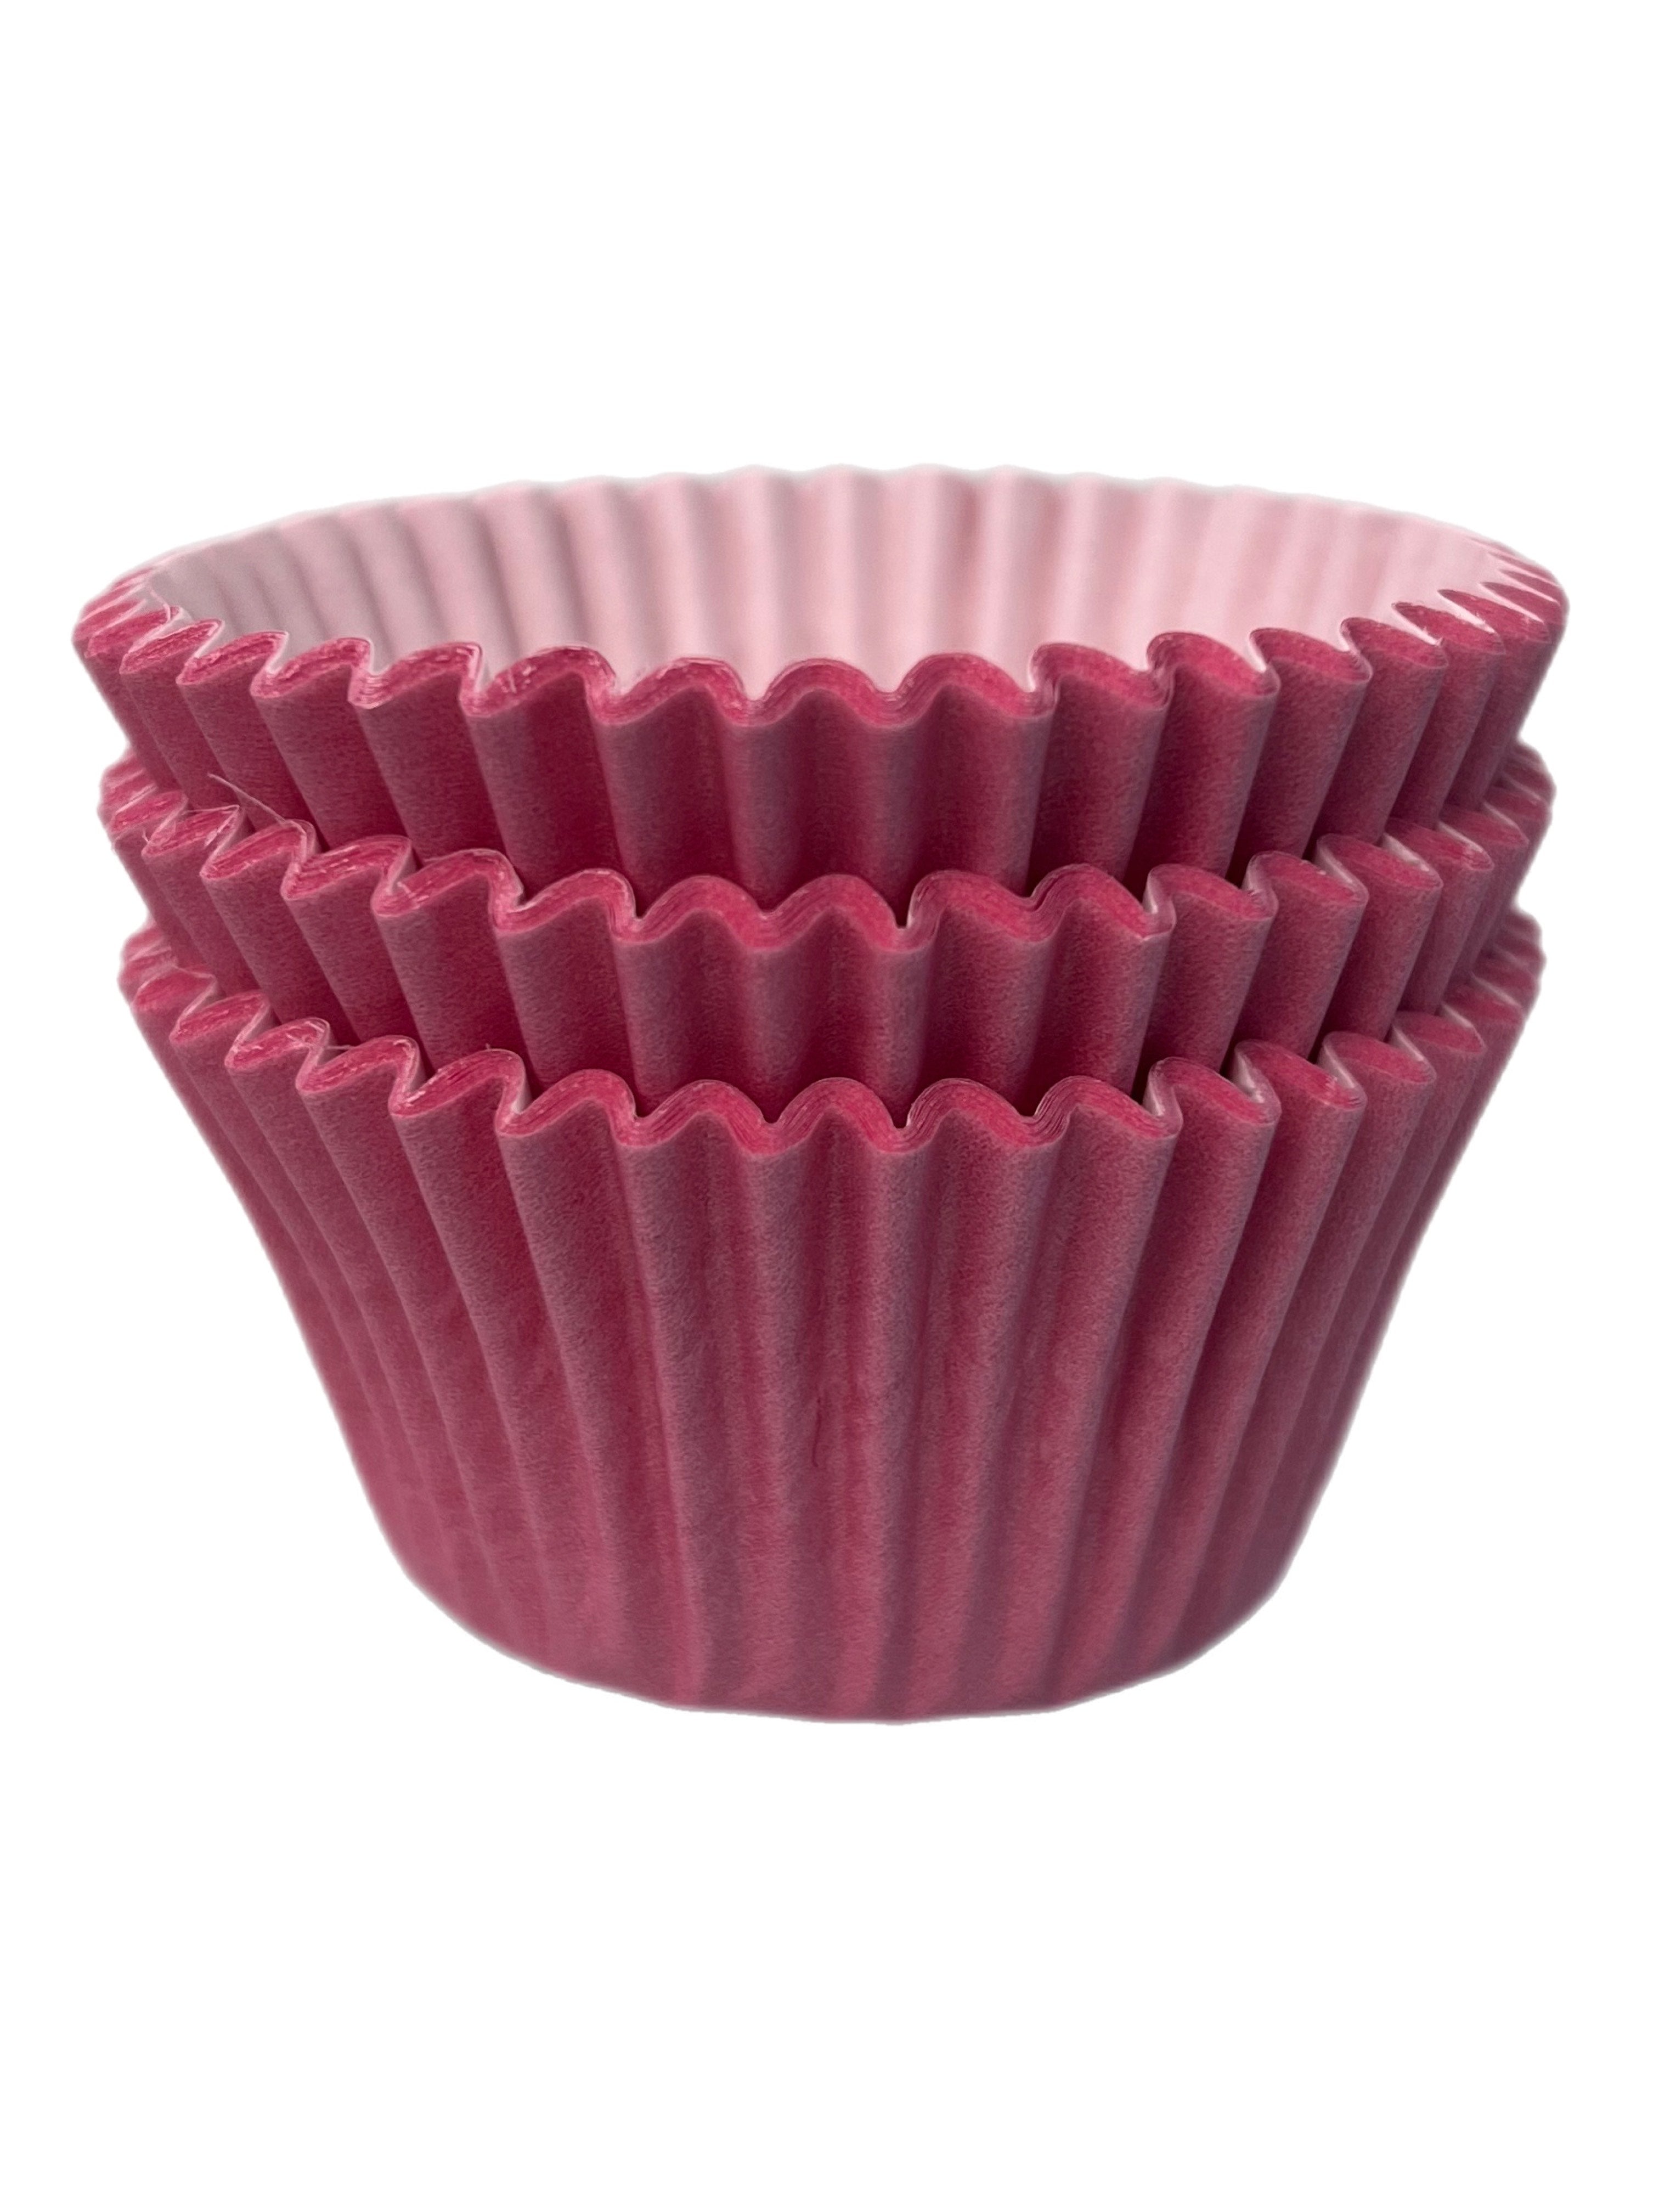 Paper Cupcake Baking Cases - pack of Approx 36 - Pale Pink - Kate's Cupboard